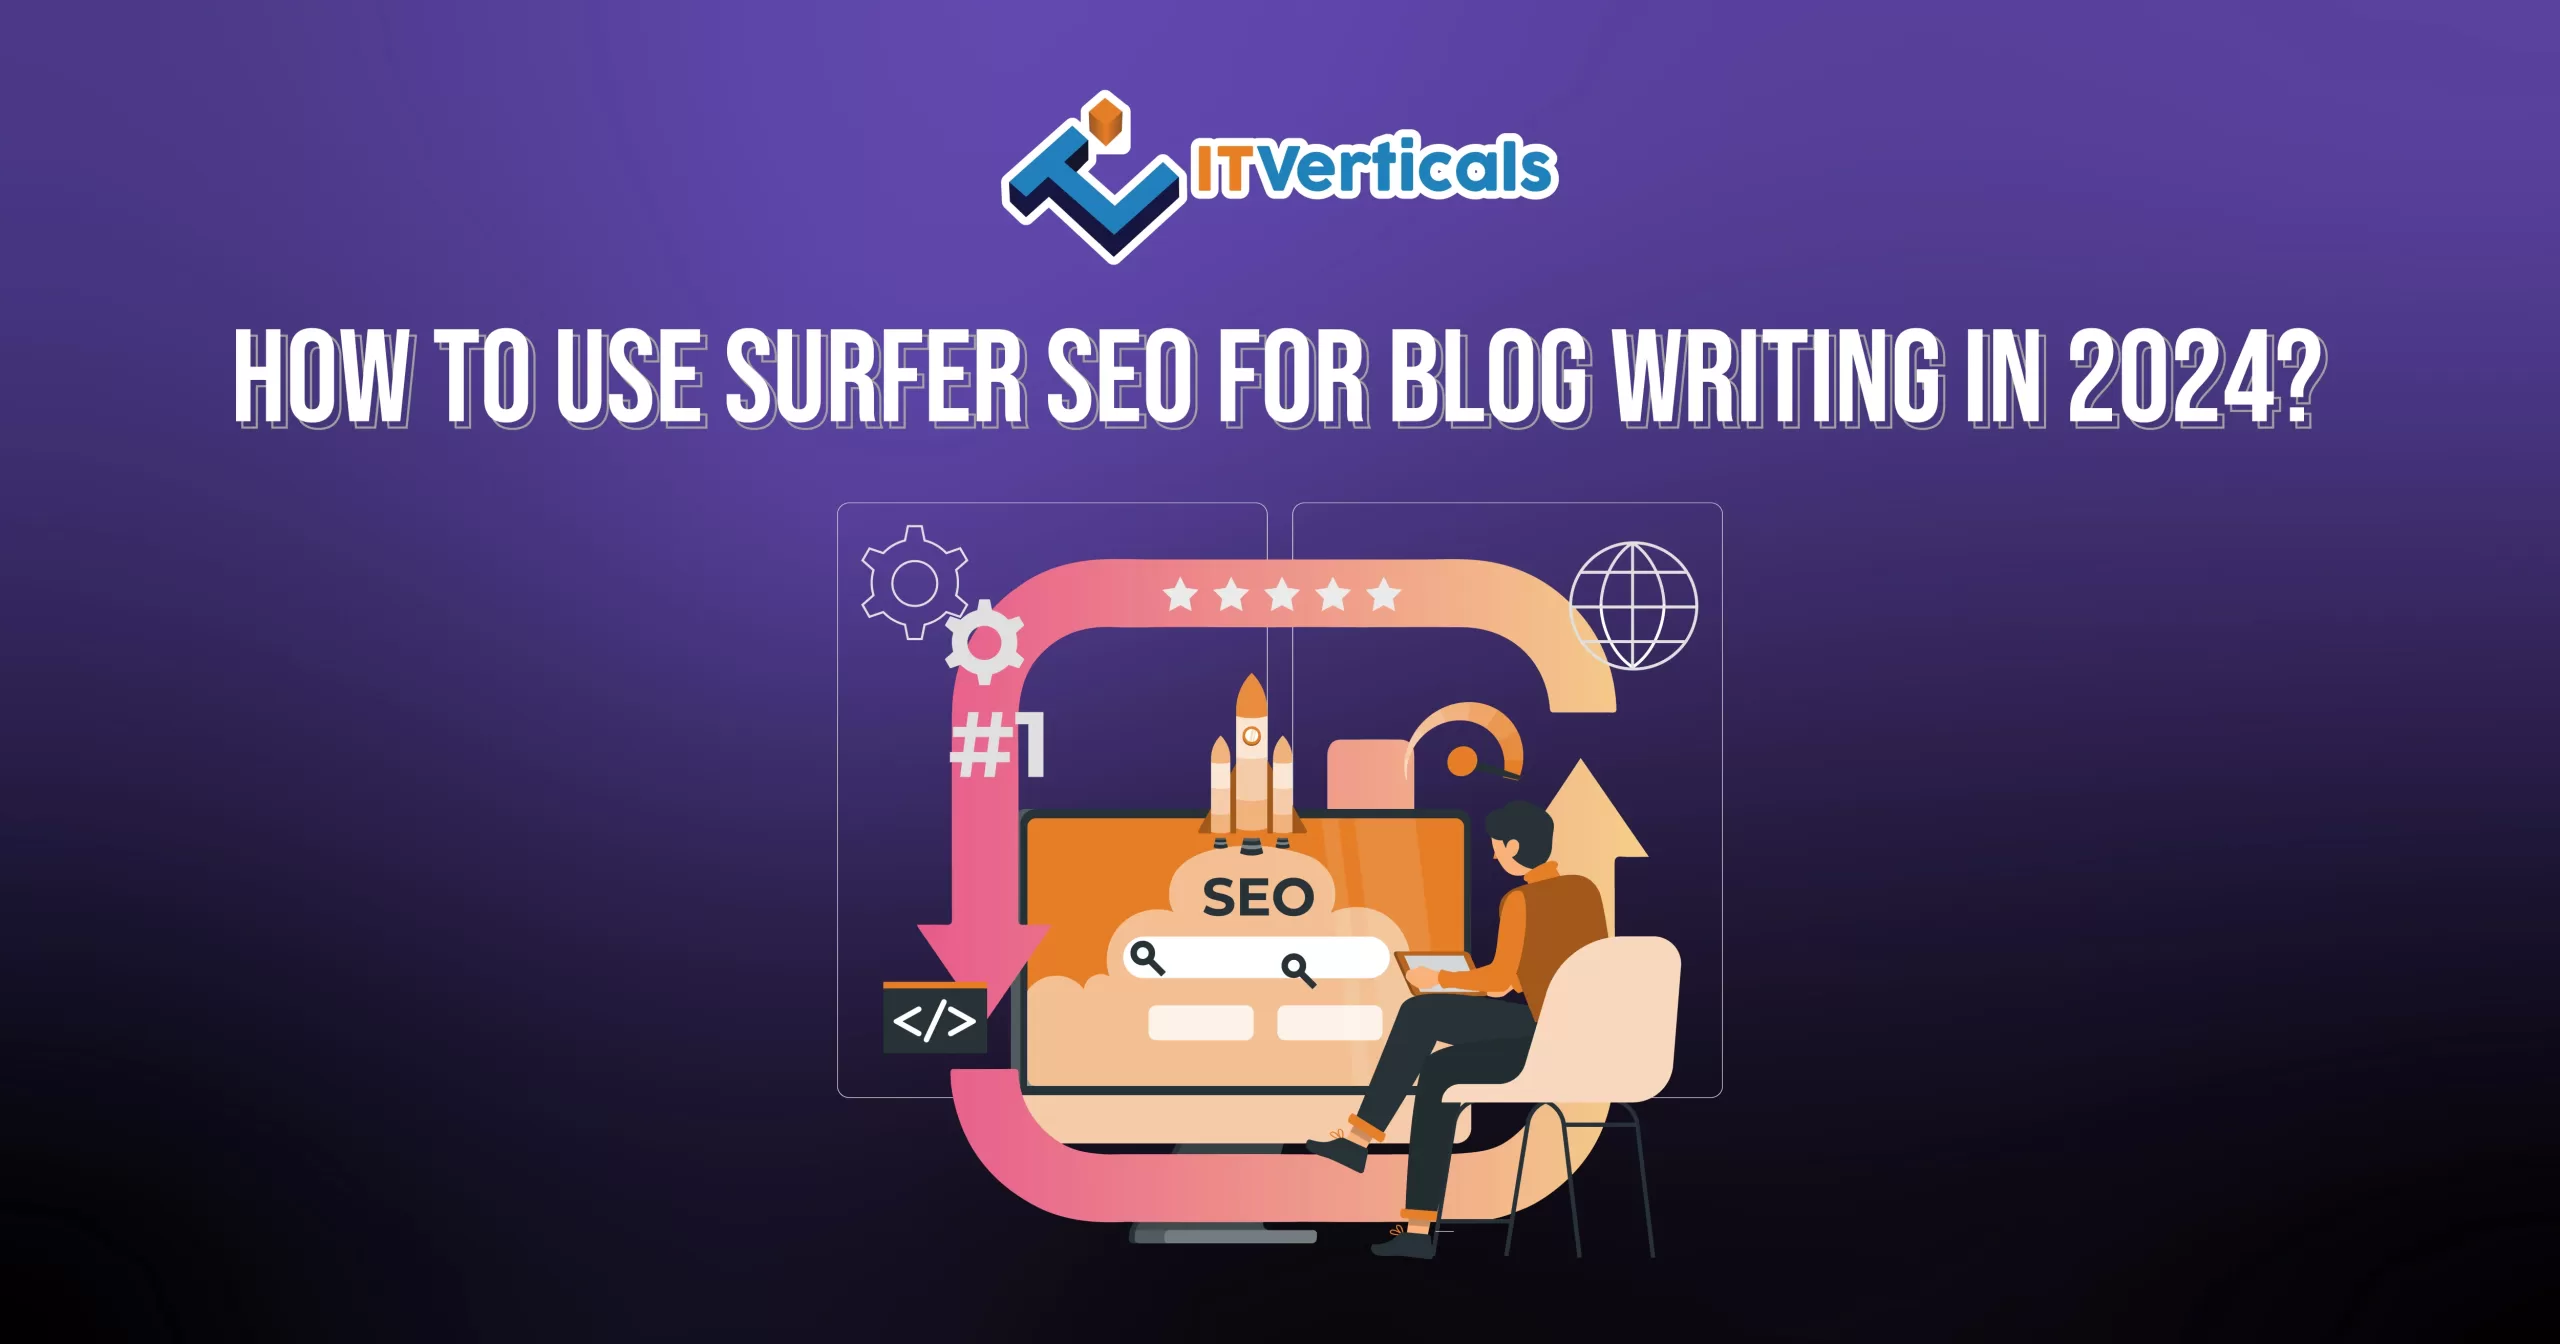 How-to-Use-Surfer-SEO-for-Blog-Writing-scaled